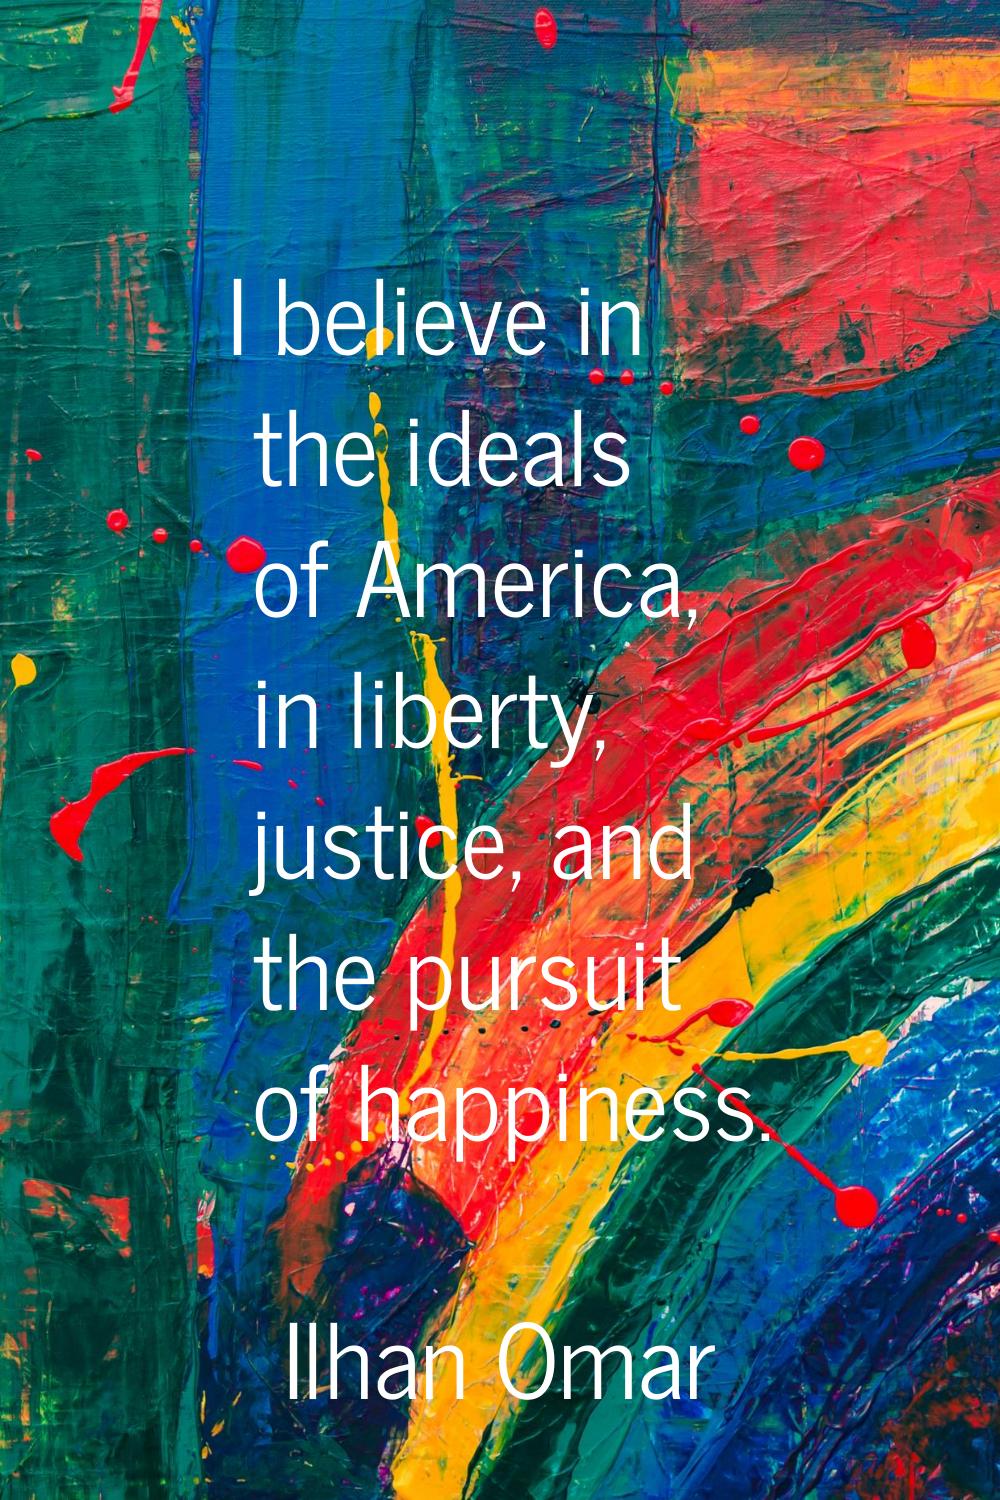 I believe in the ideals of America, in liberty, justice, and the pursuit of happiness.